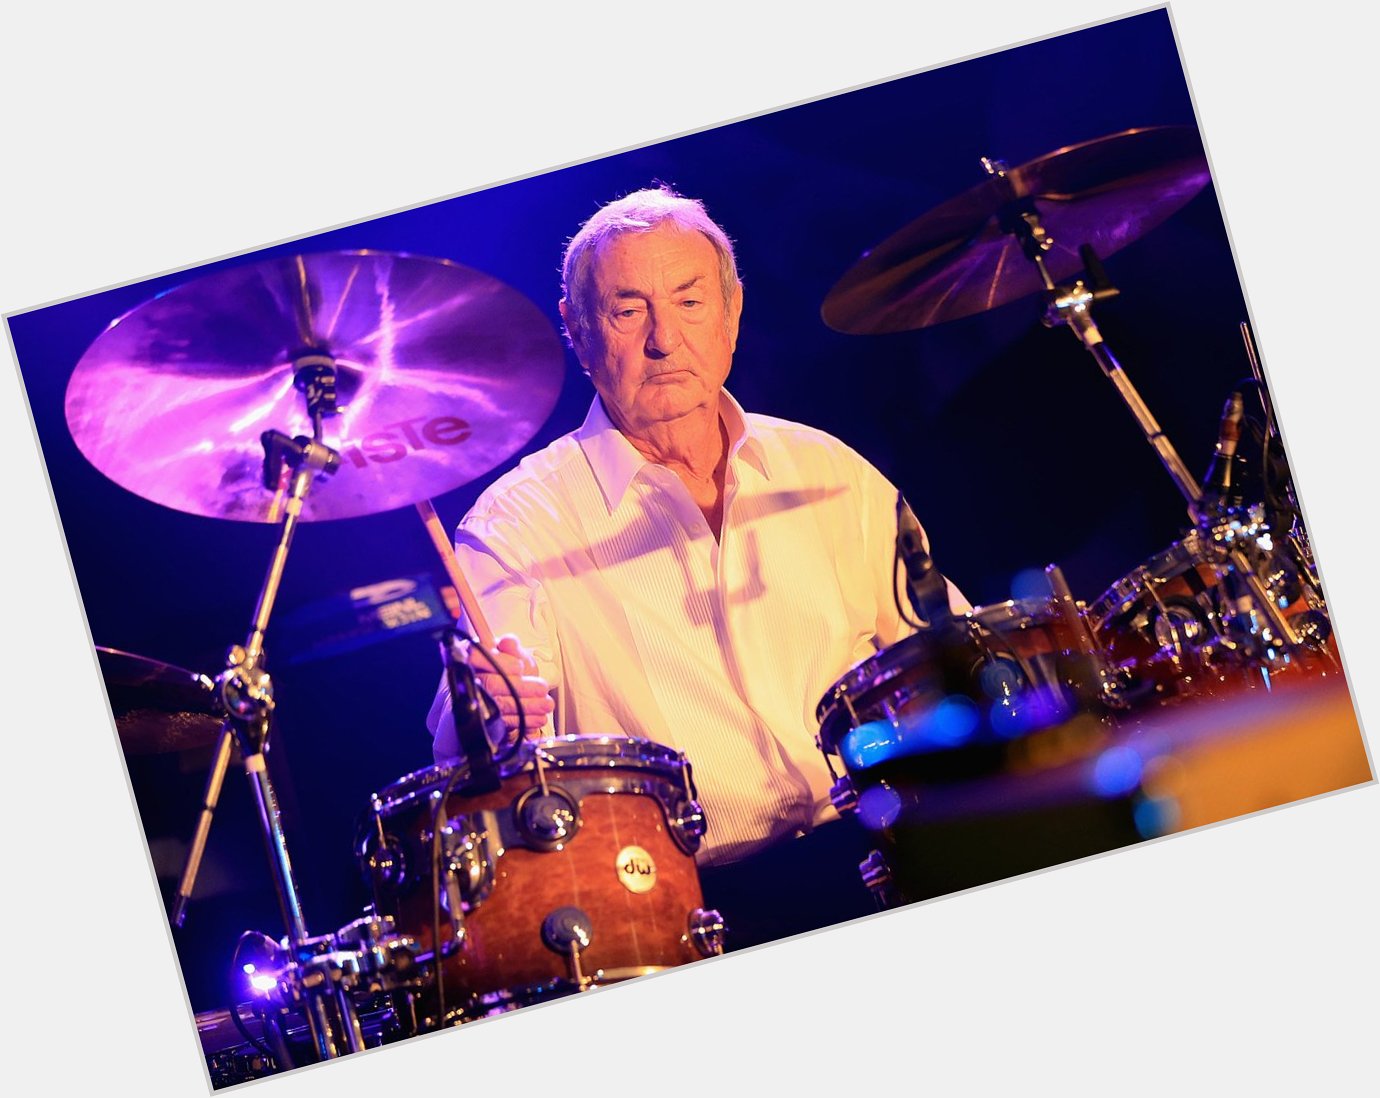 Please join me here at in wishing the one and only Nick Mason a very Happy 77th Birthday today  